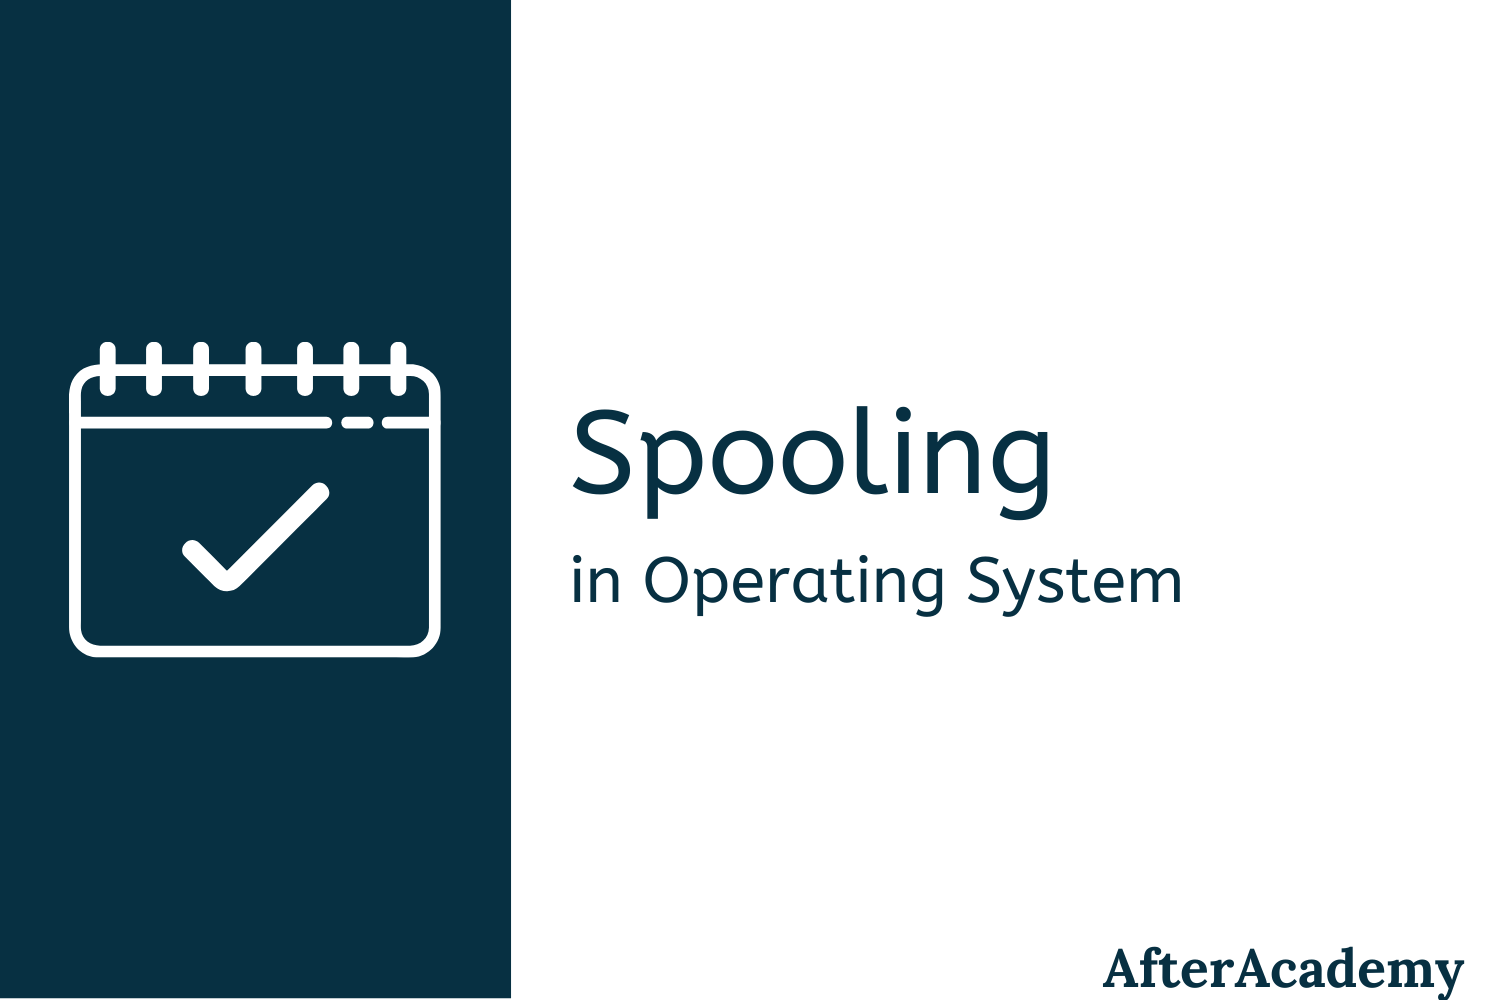 What is Spooling in Operating System?